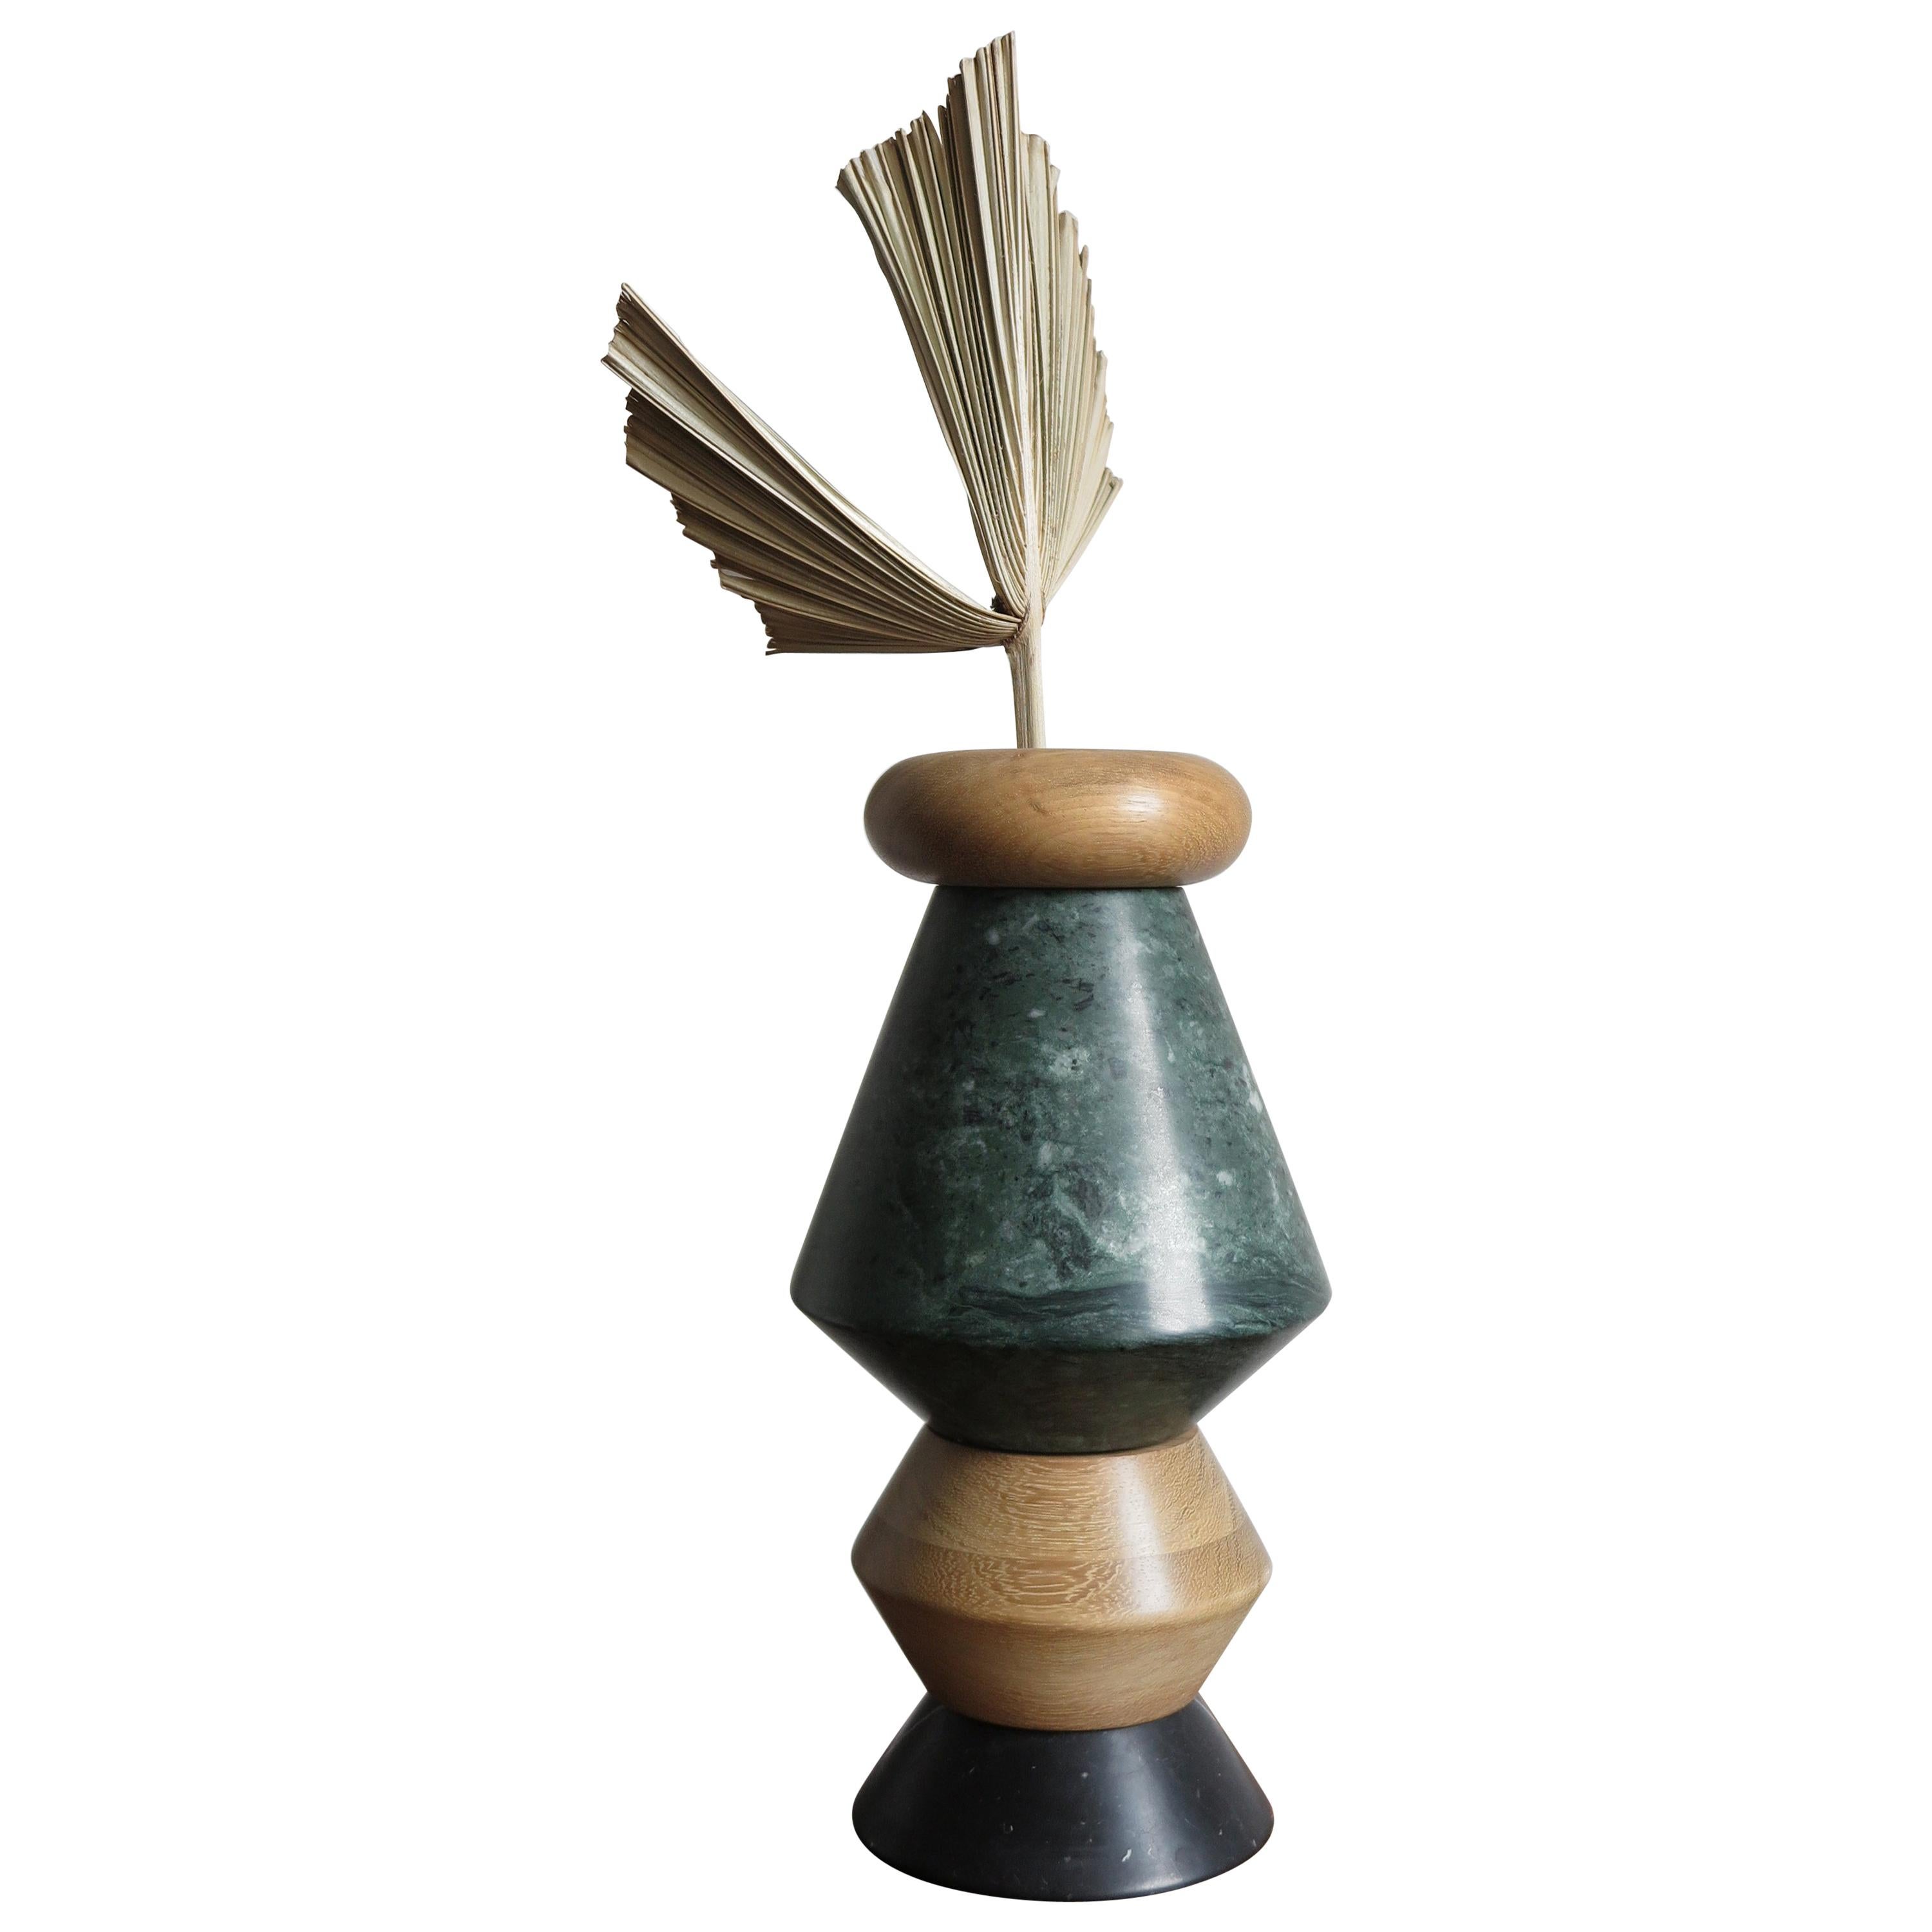 Wood and Marble Contemporary Sculpture, Candleholders, Flower Vase "iTotem"